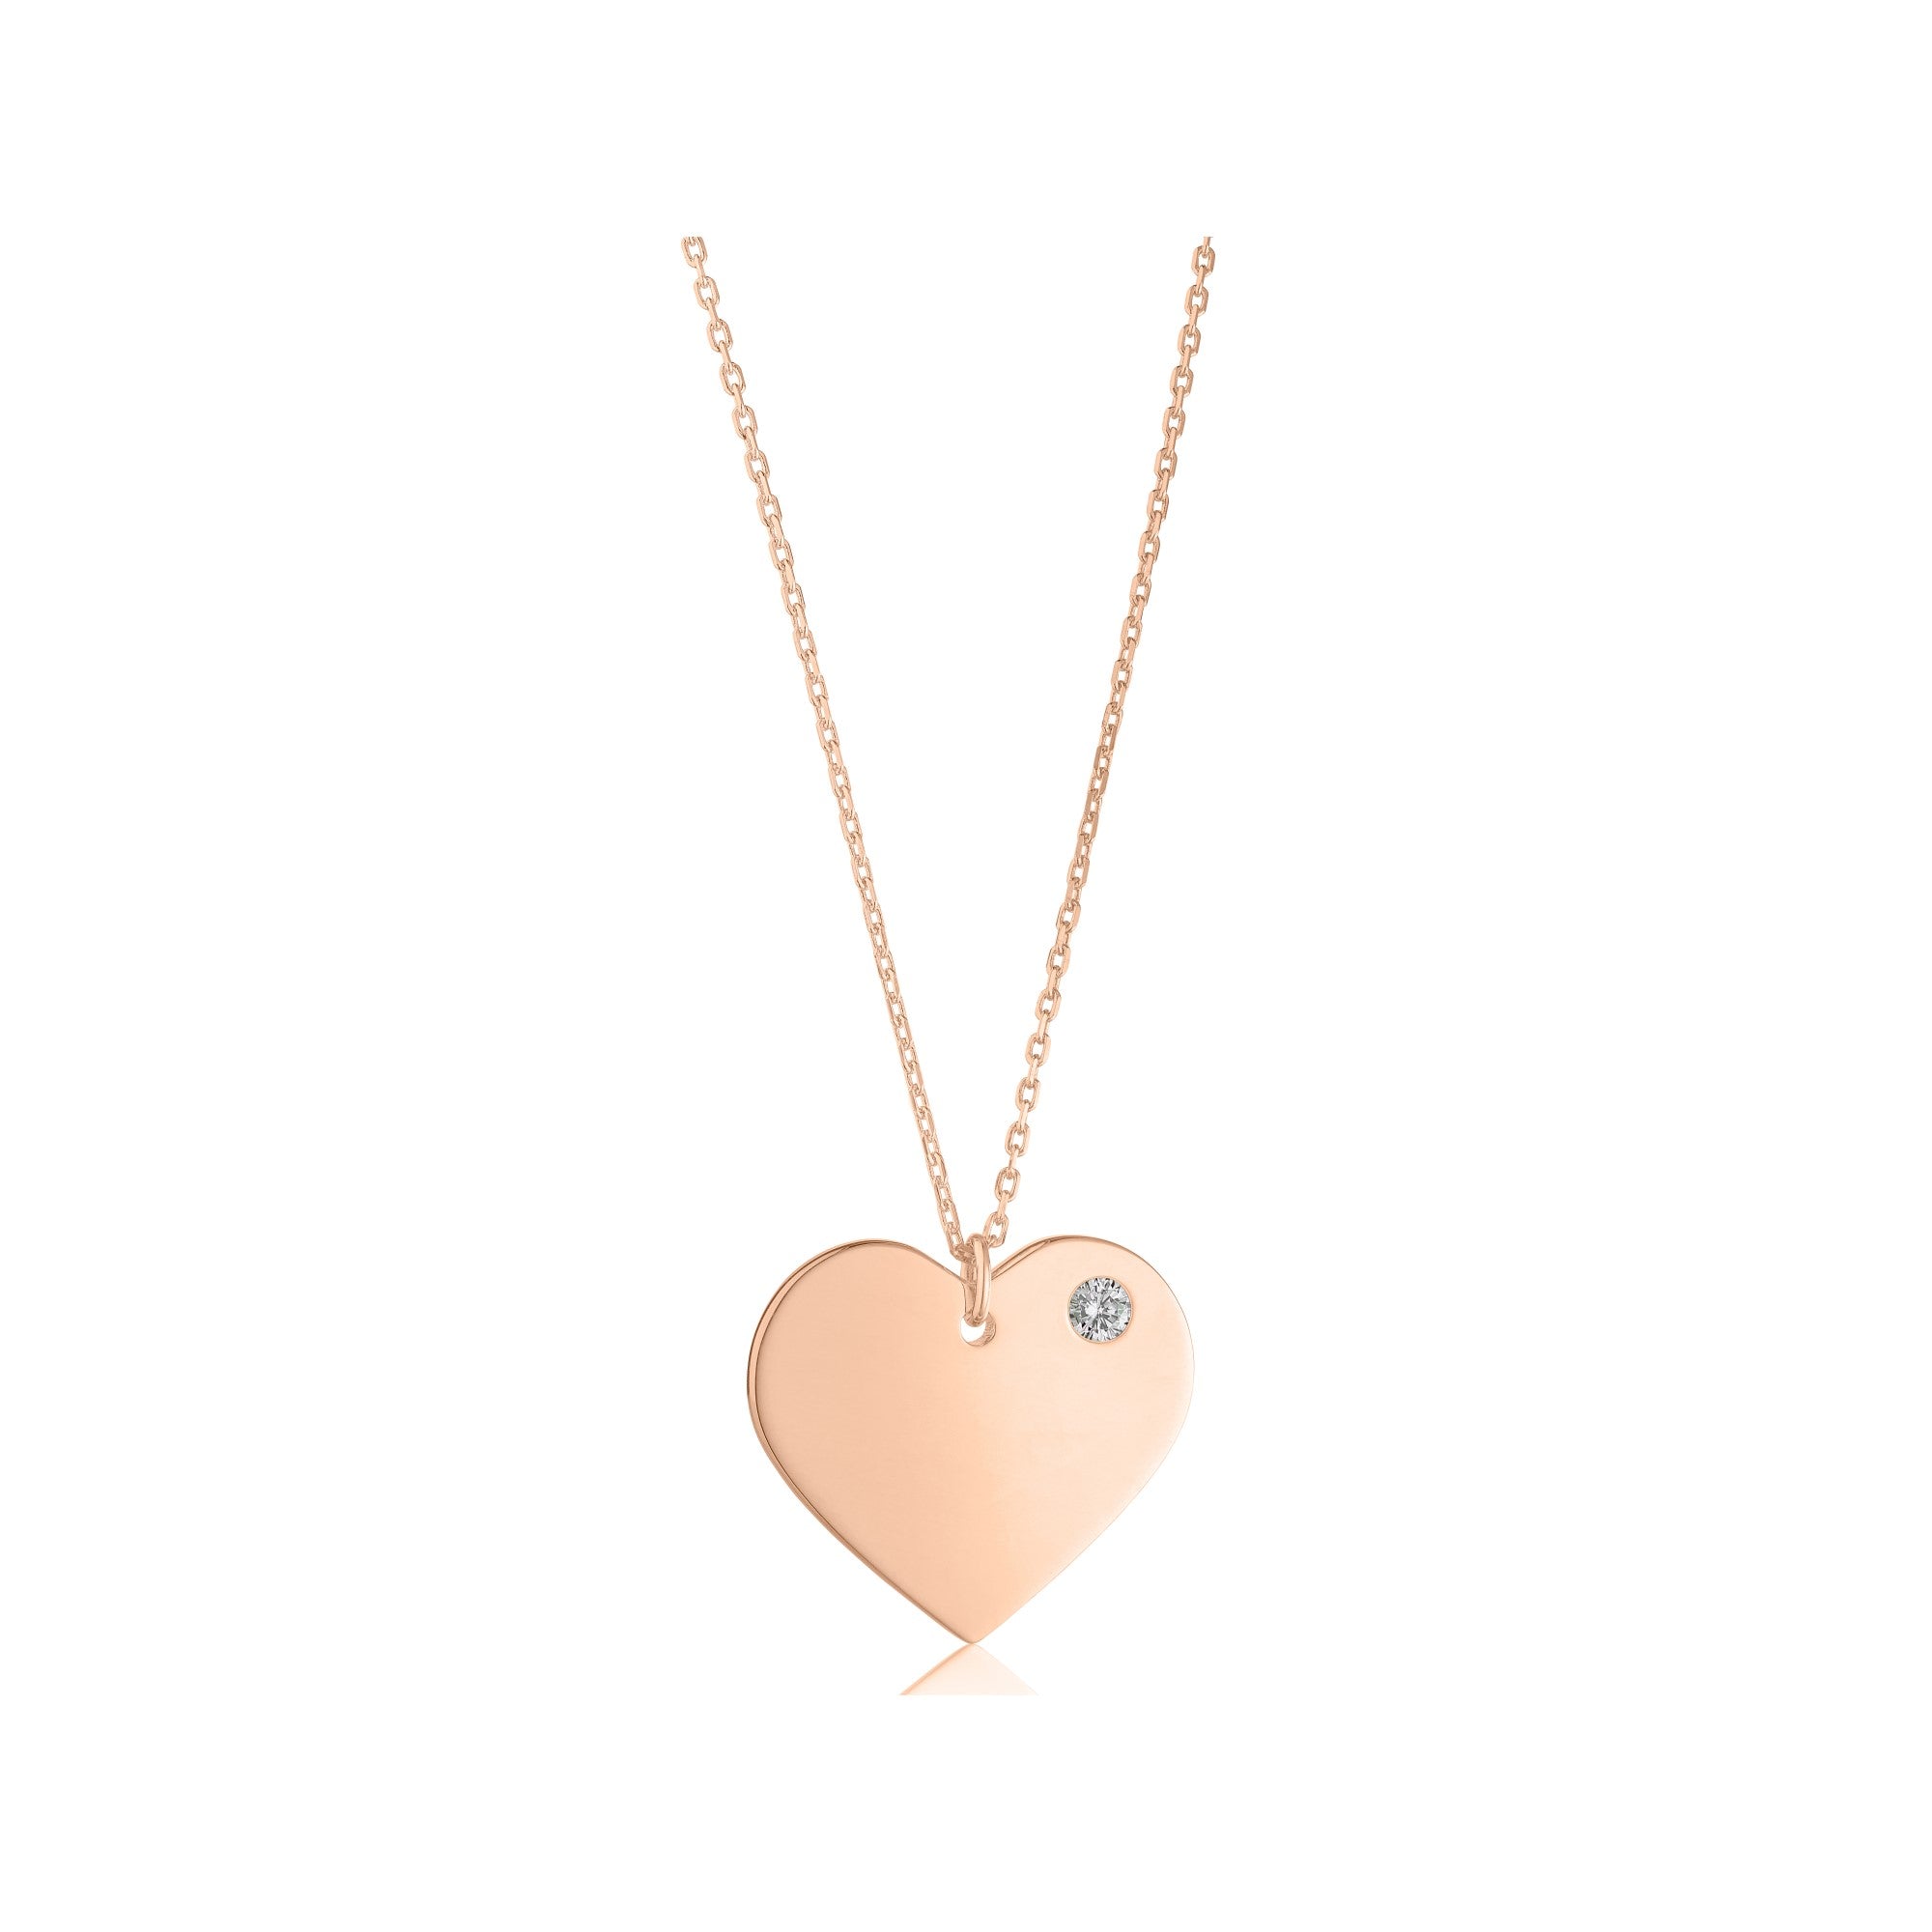 MASSETE Sterling Silver 925 Rose Gold Plated Personalized Engraved Heart Necklace with Simulated Birthstone Custom Engravable Pendant for Women and Girls